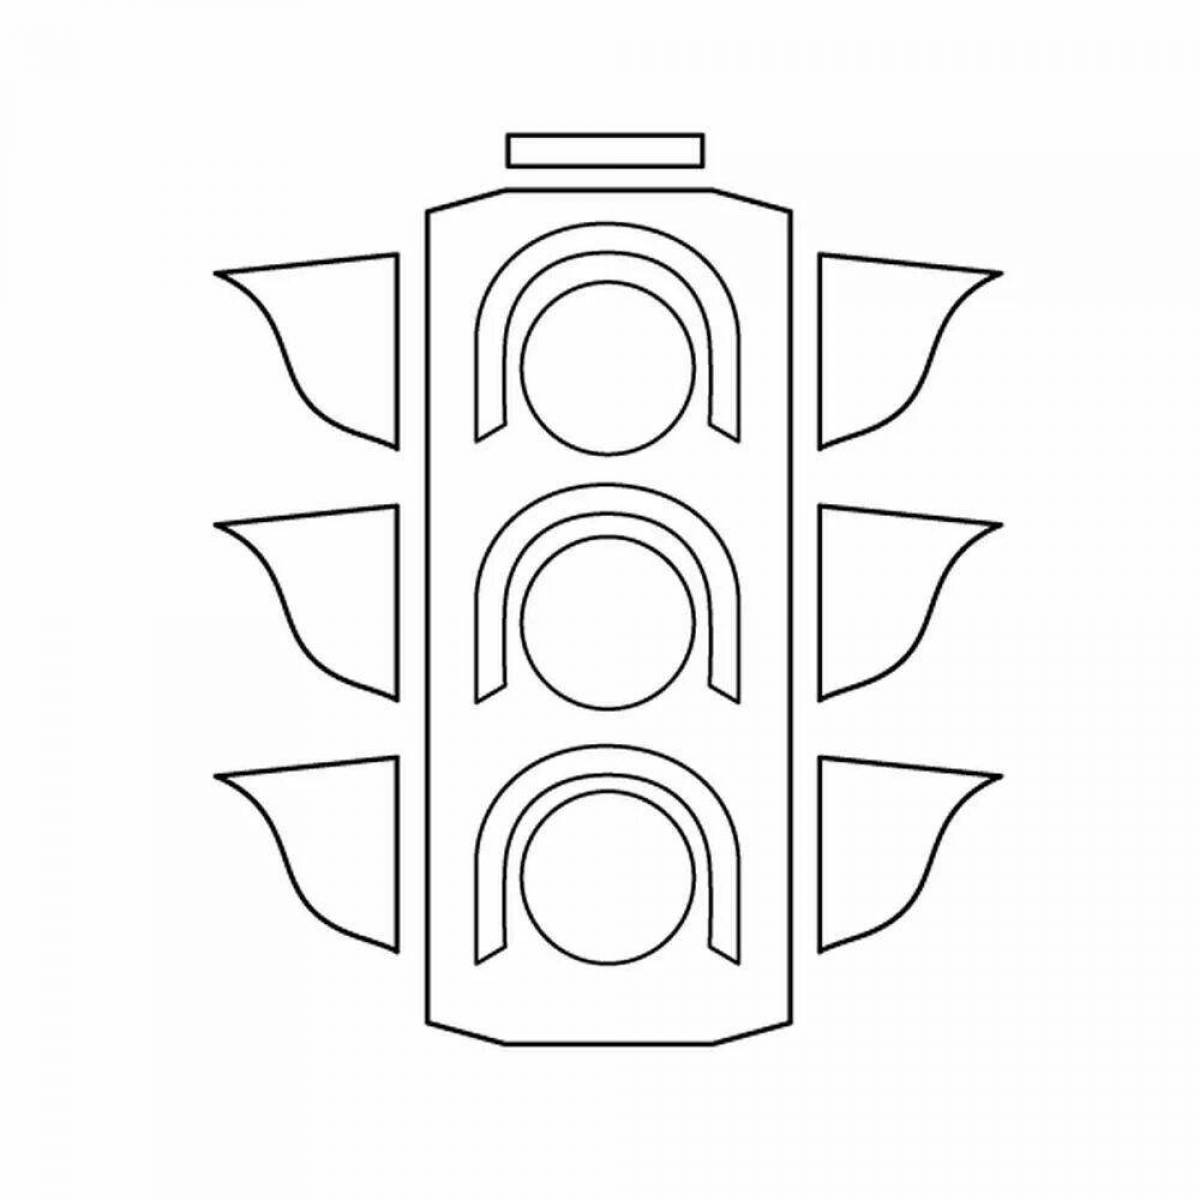 Attractive traffic light coloring page